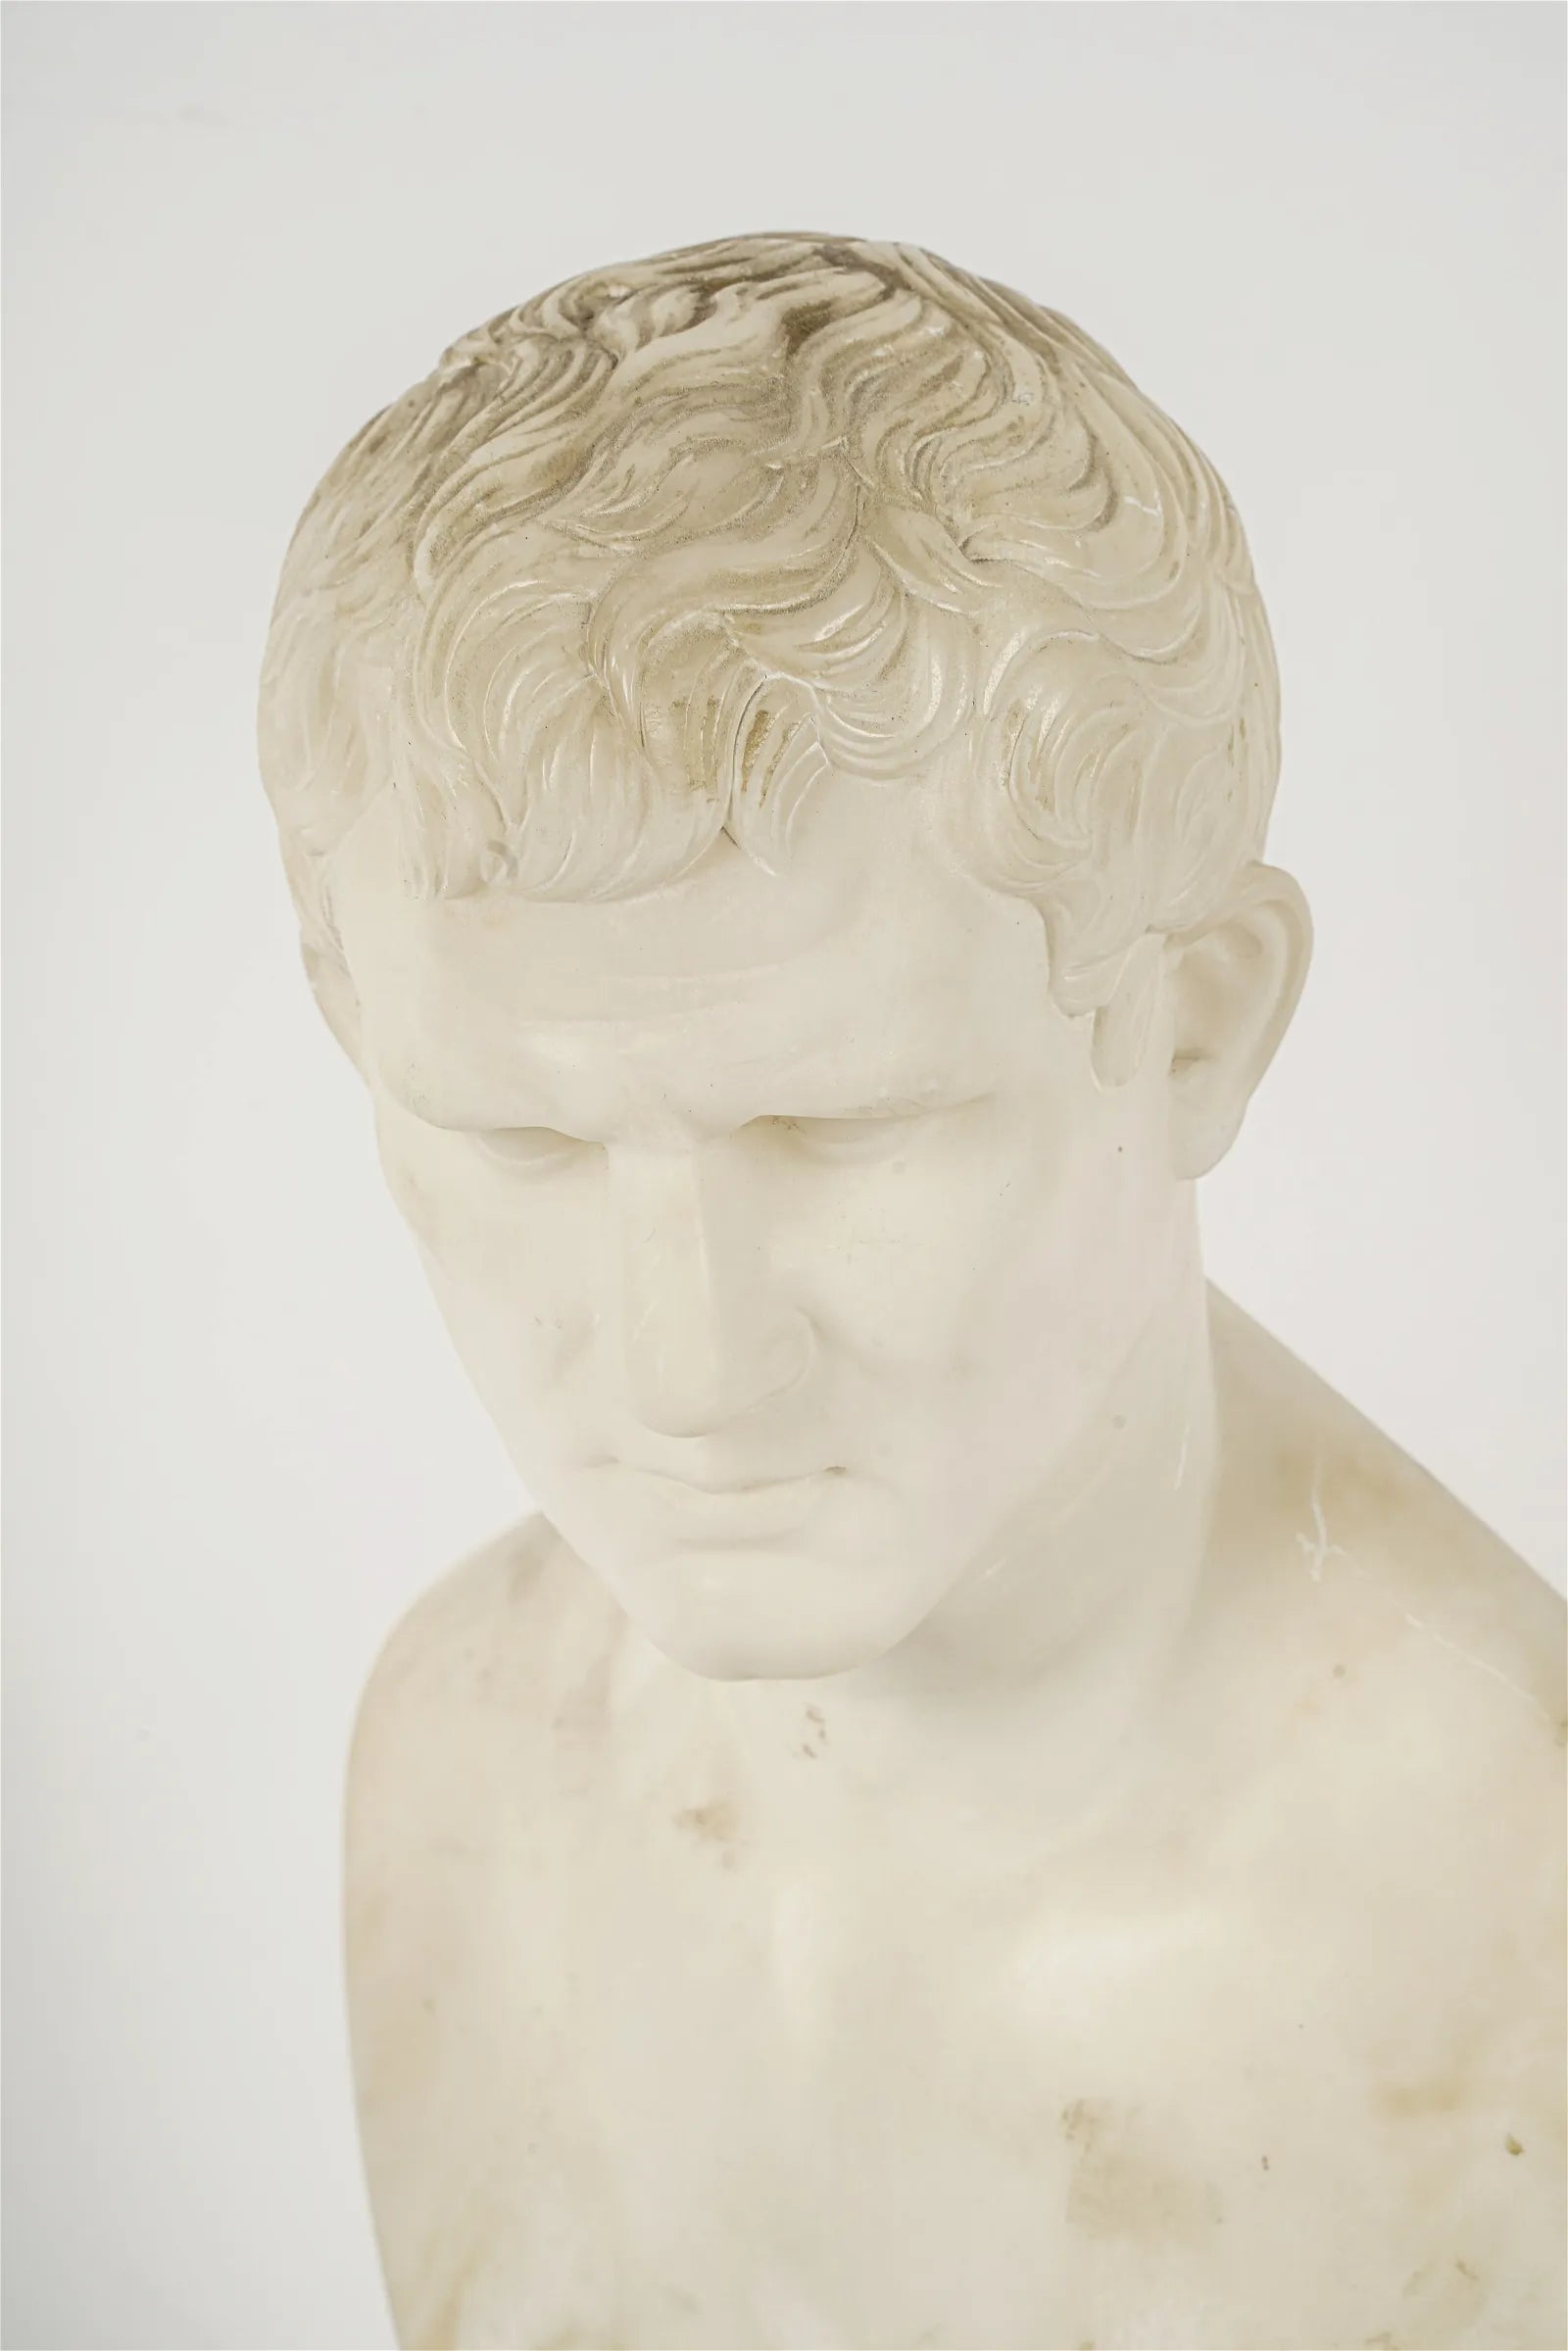 AW11-017: Late 19th Century Carved Marble Bust of Marcus Vipsanius Agrippa